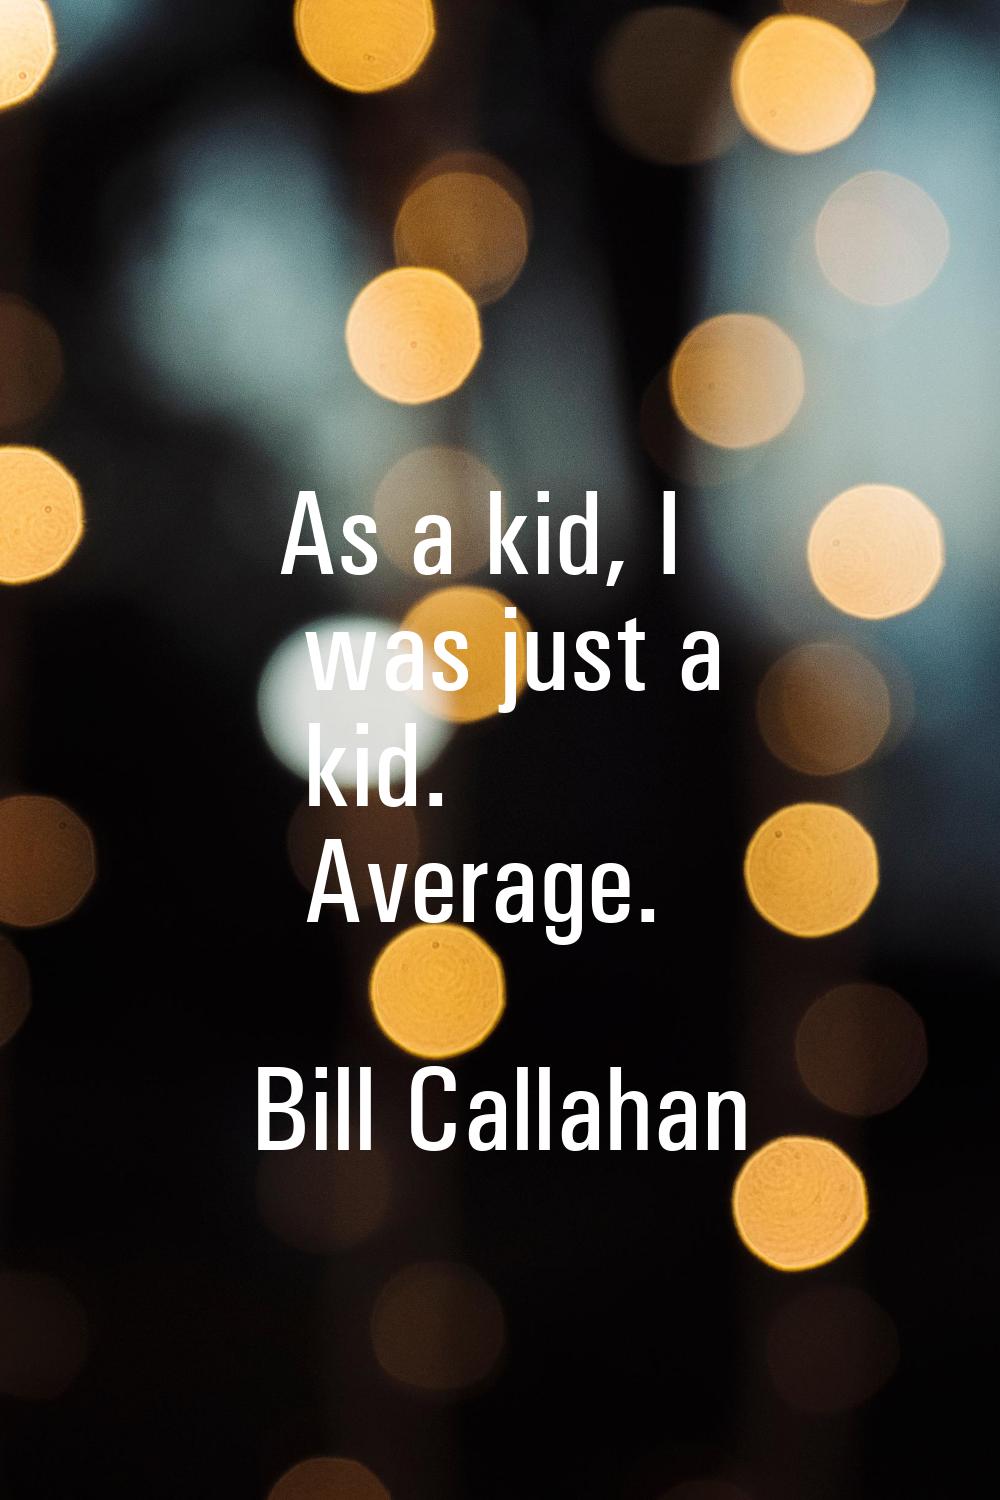 As a kid, I was just a kid. Average.